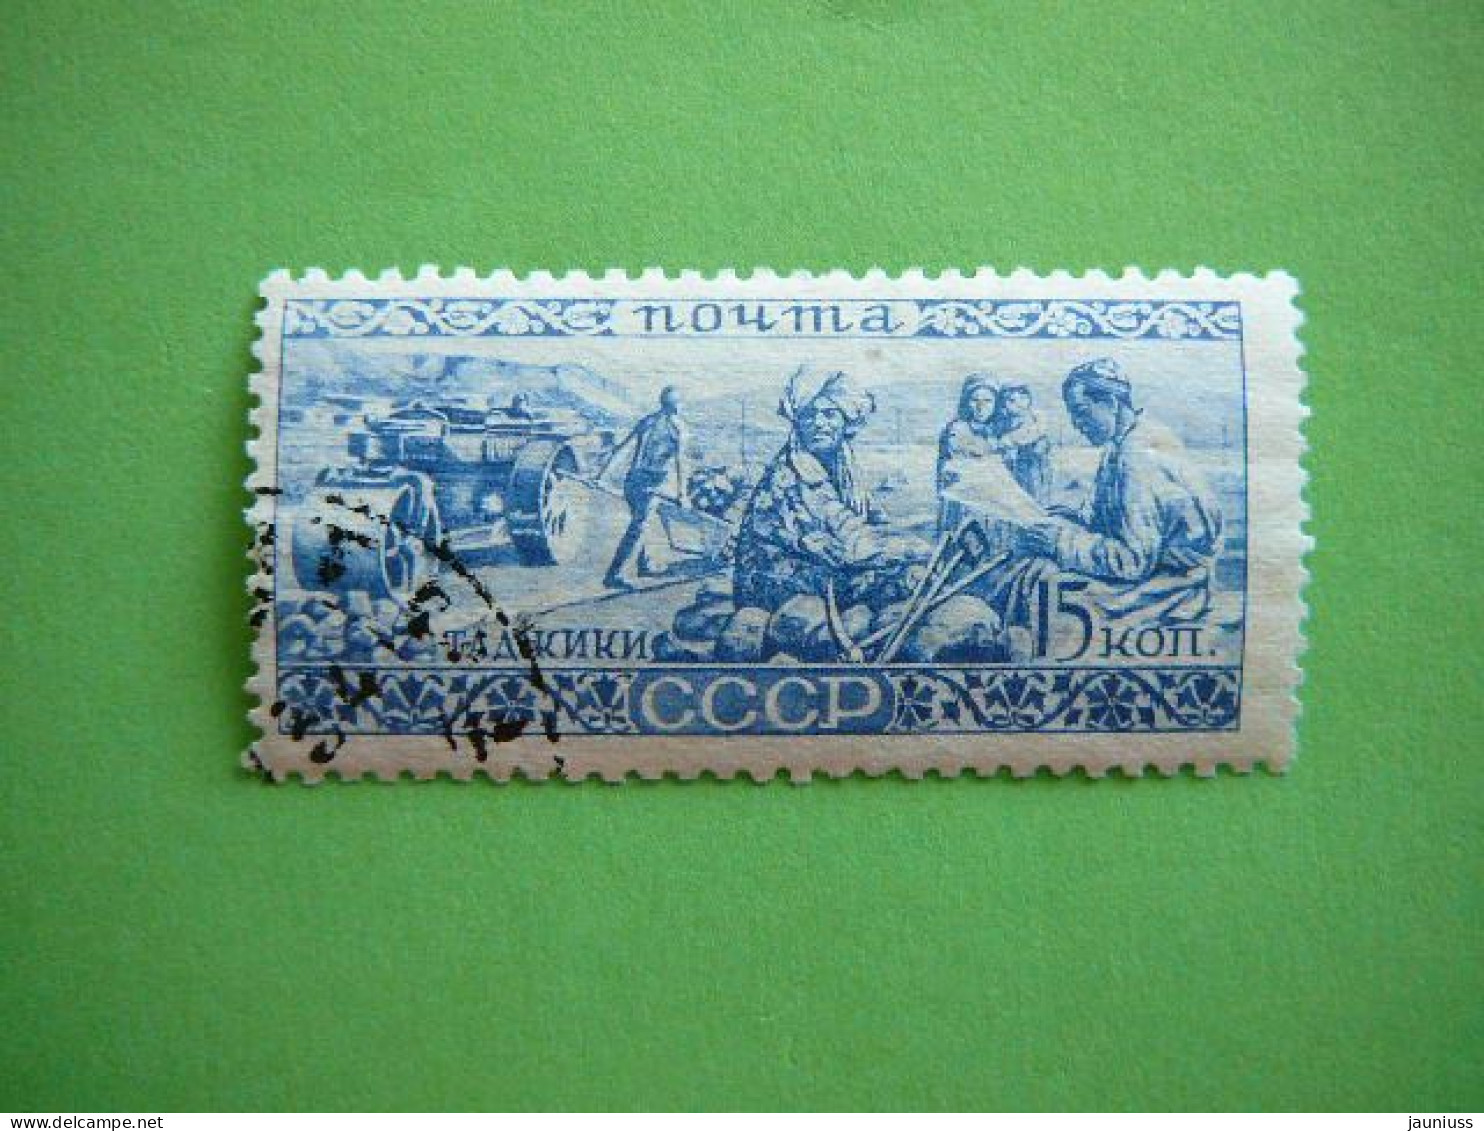 Ethnography Of USSR  # Russia USSR Sowjetunion # 1933 15k. Used #Mi. 443 - Used Stamps